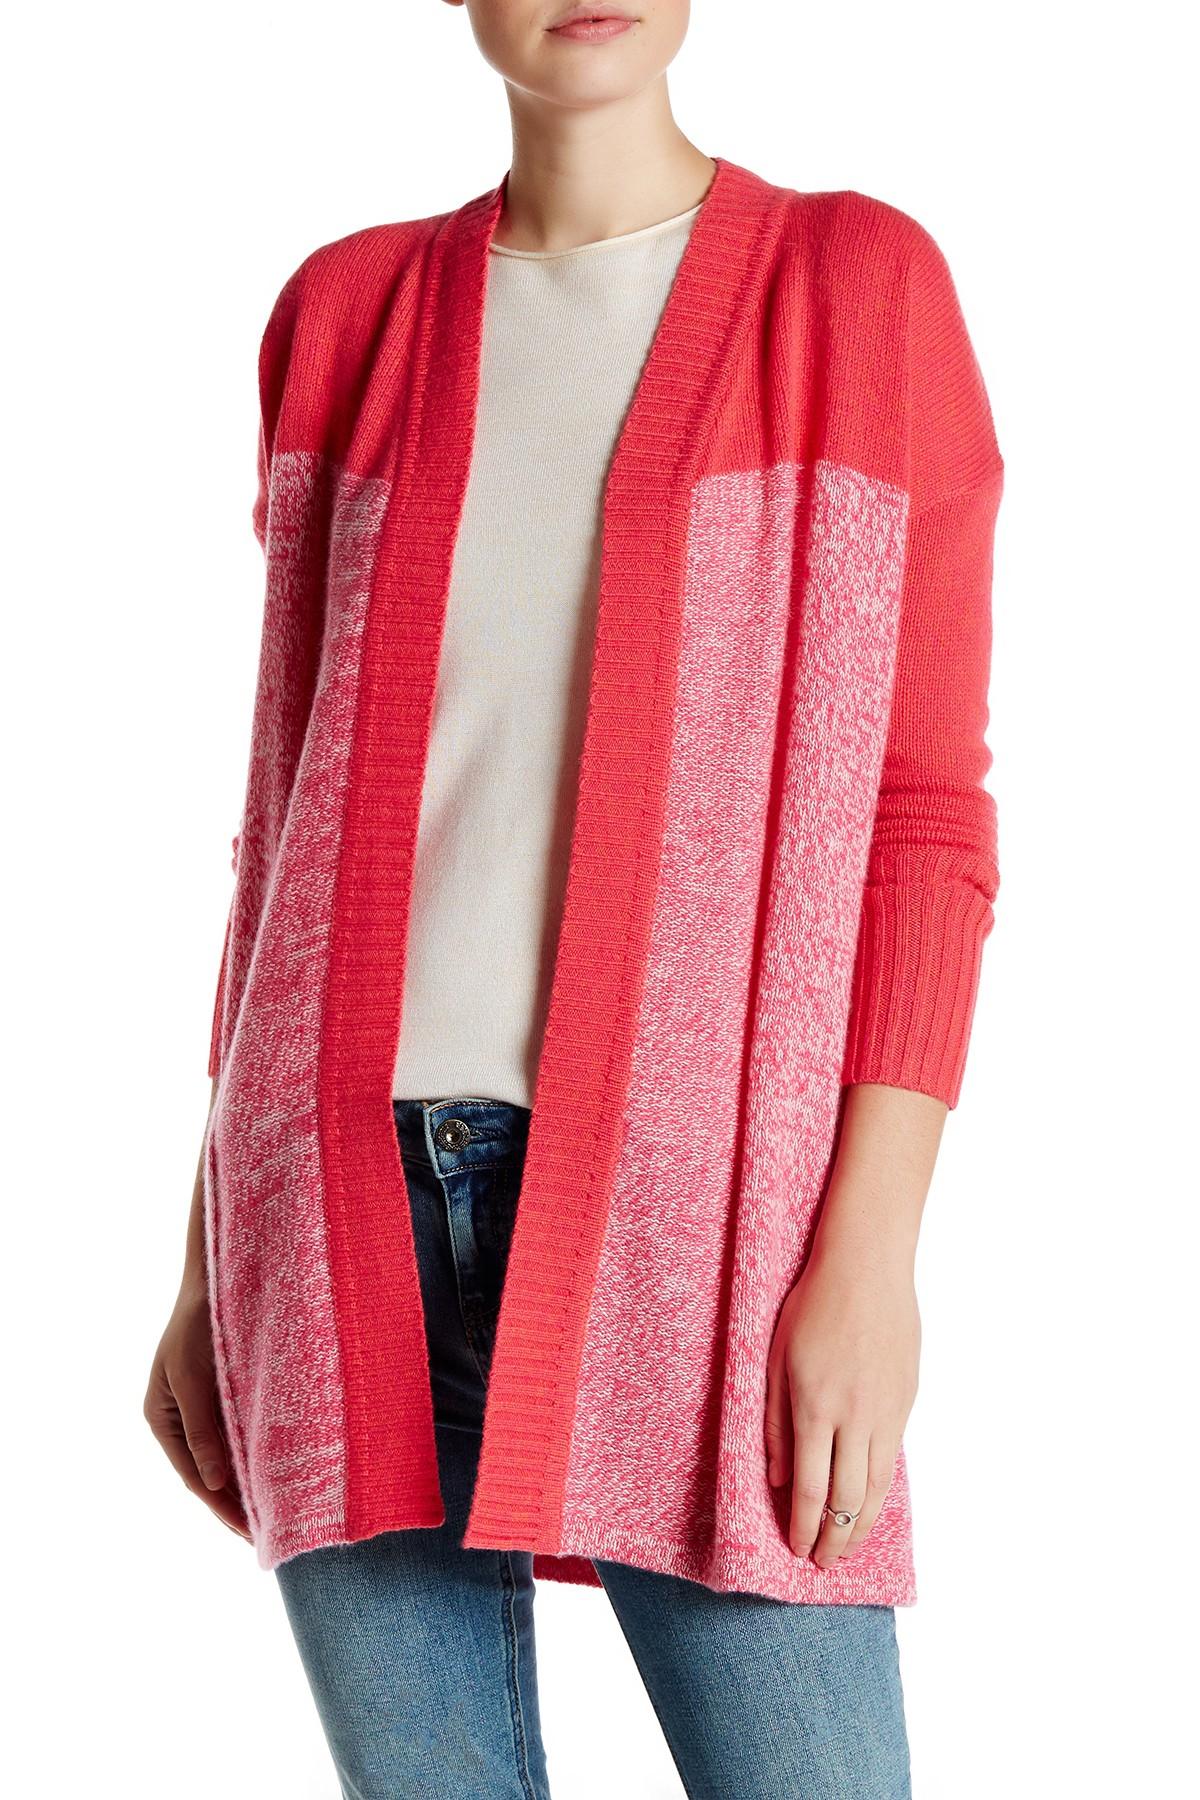 Lyst - Kinross Cashmere Marled Colorblock Cashmere Cardigan in Pink